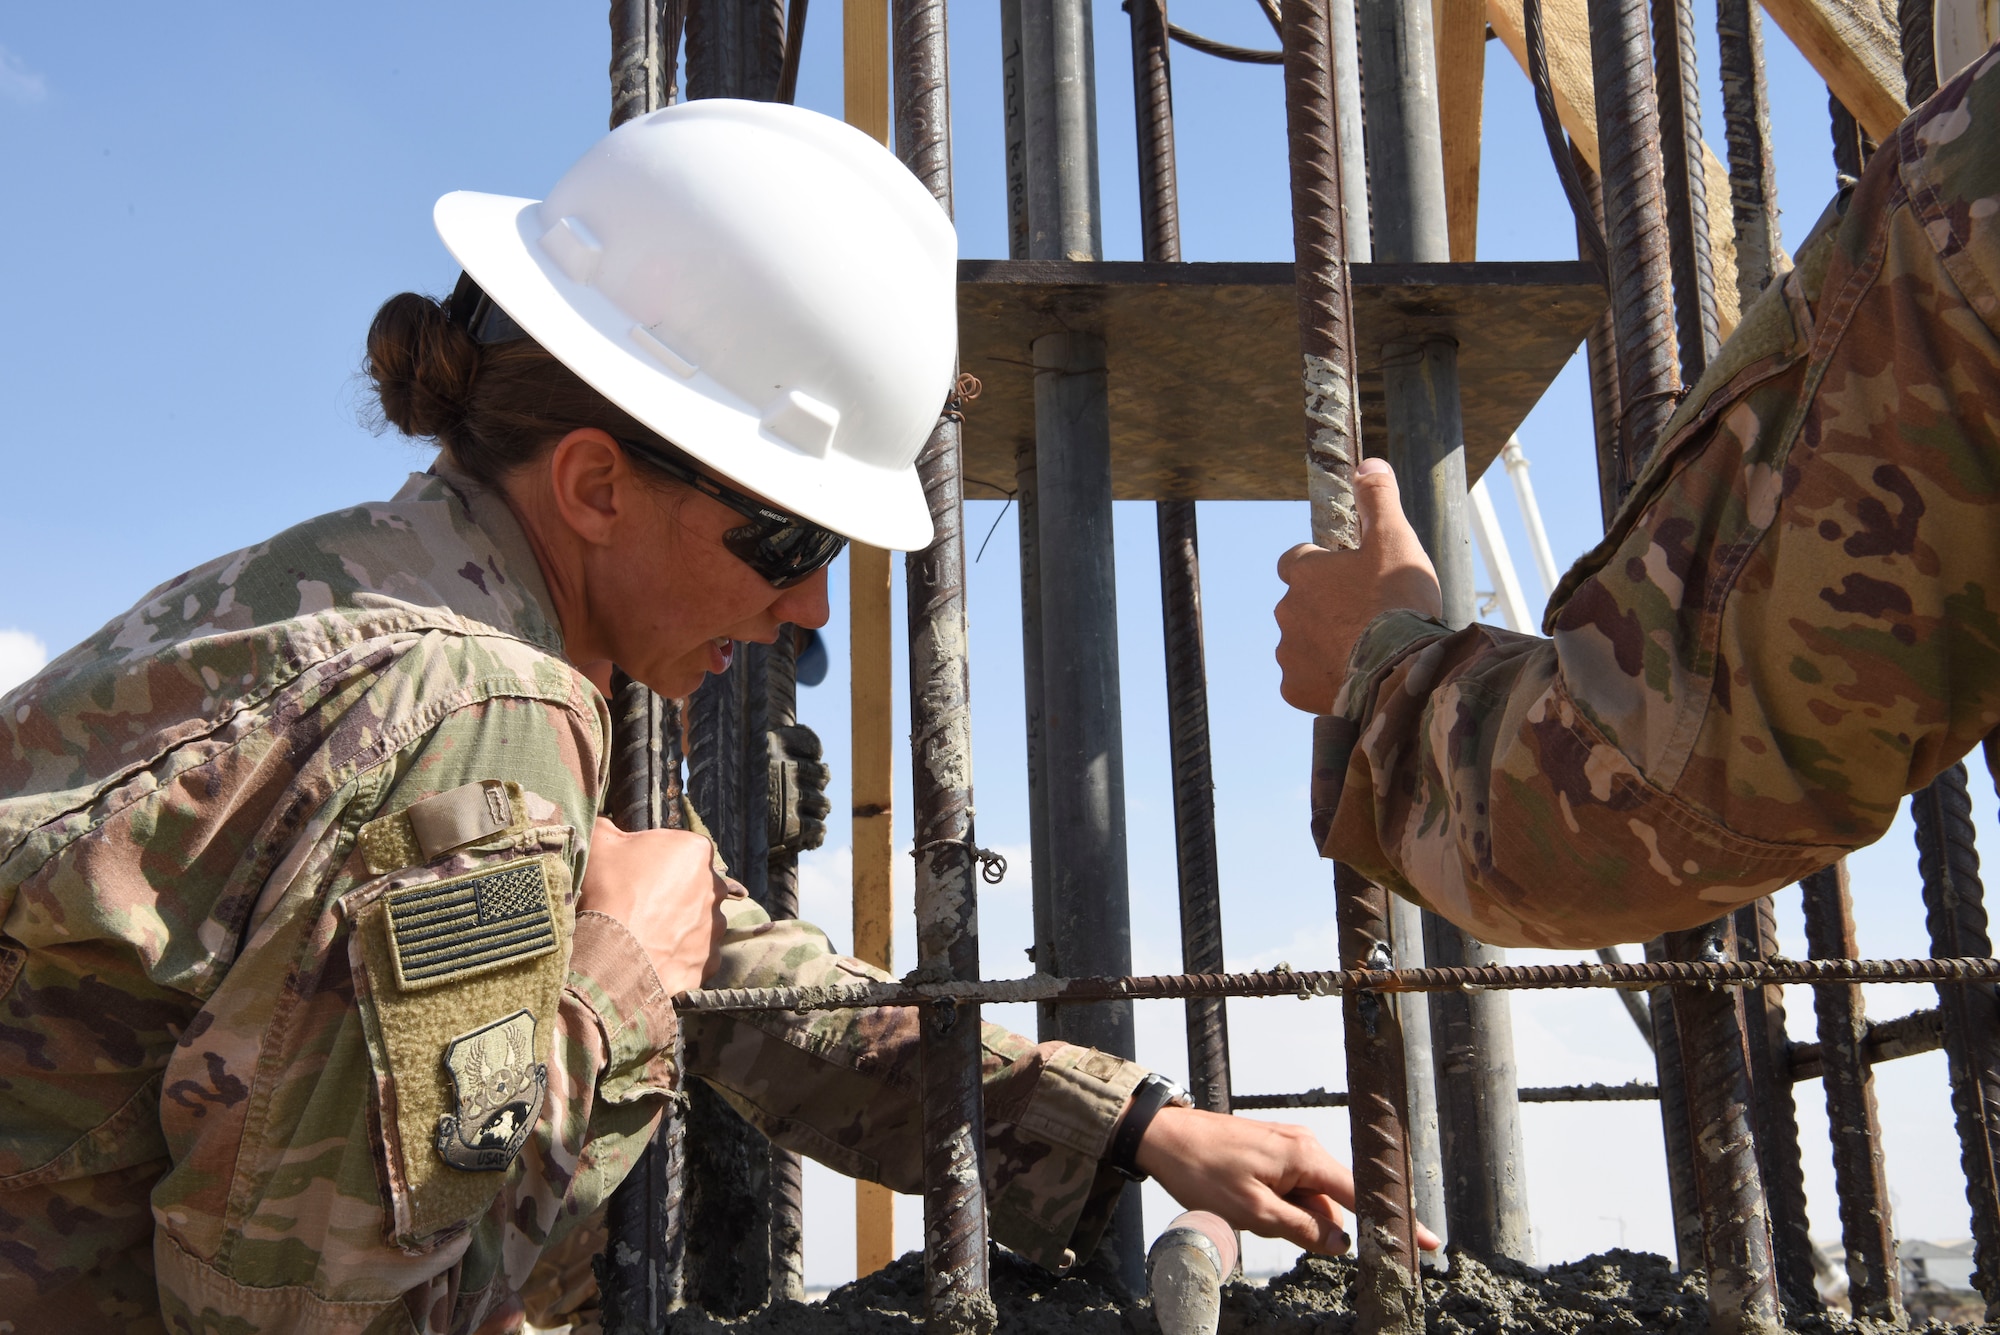 Capt. Paige Blackburn, 577 EPBS officer in charge of troop construction, inspects the concrete poured into the foundation system to support a build during construction, Dec. 23, 2018 at Al Dhafra Air Base, United Arab Emirates.